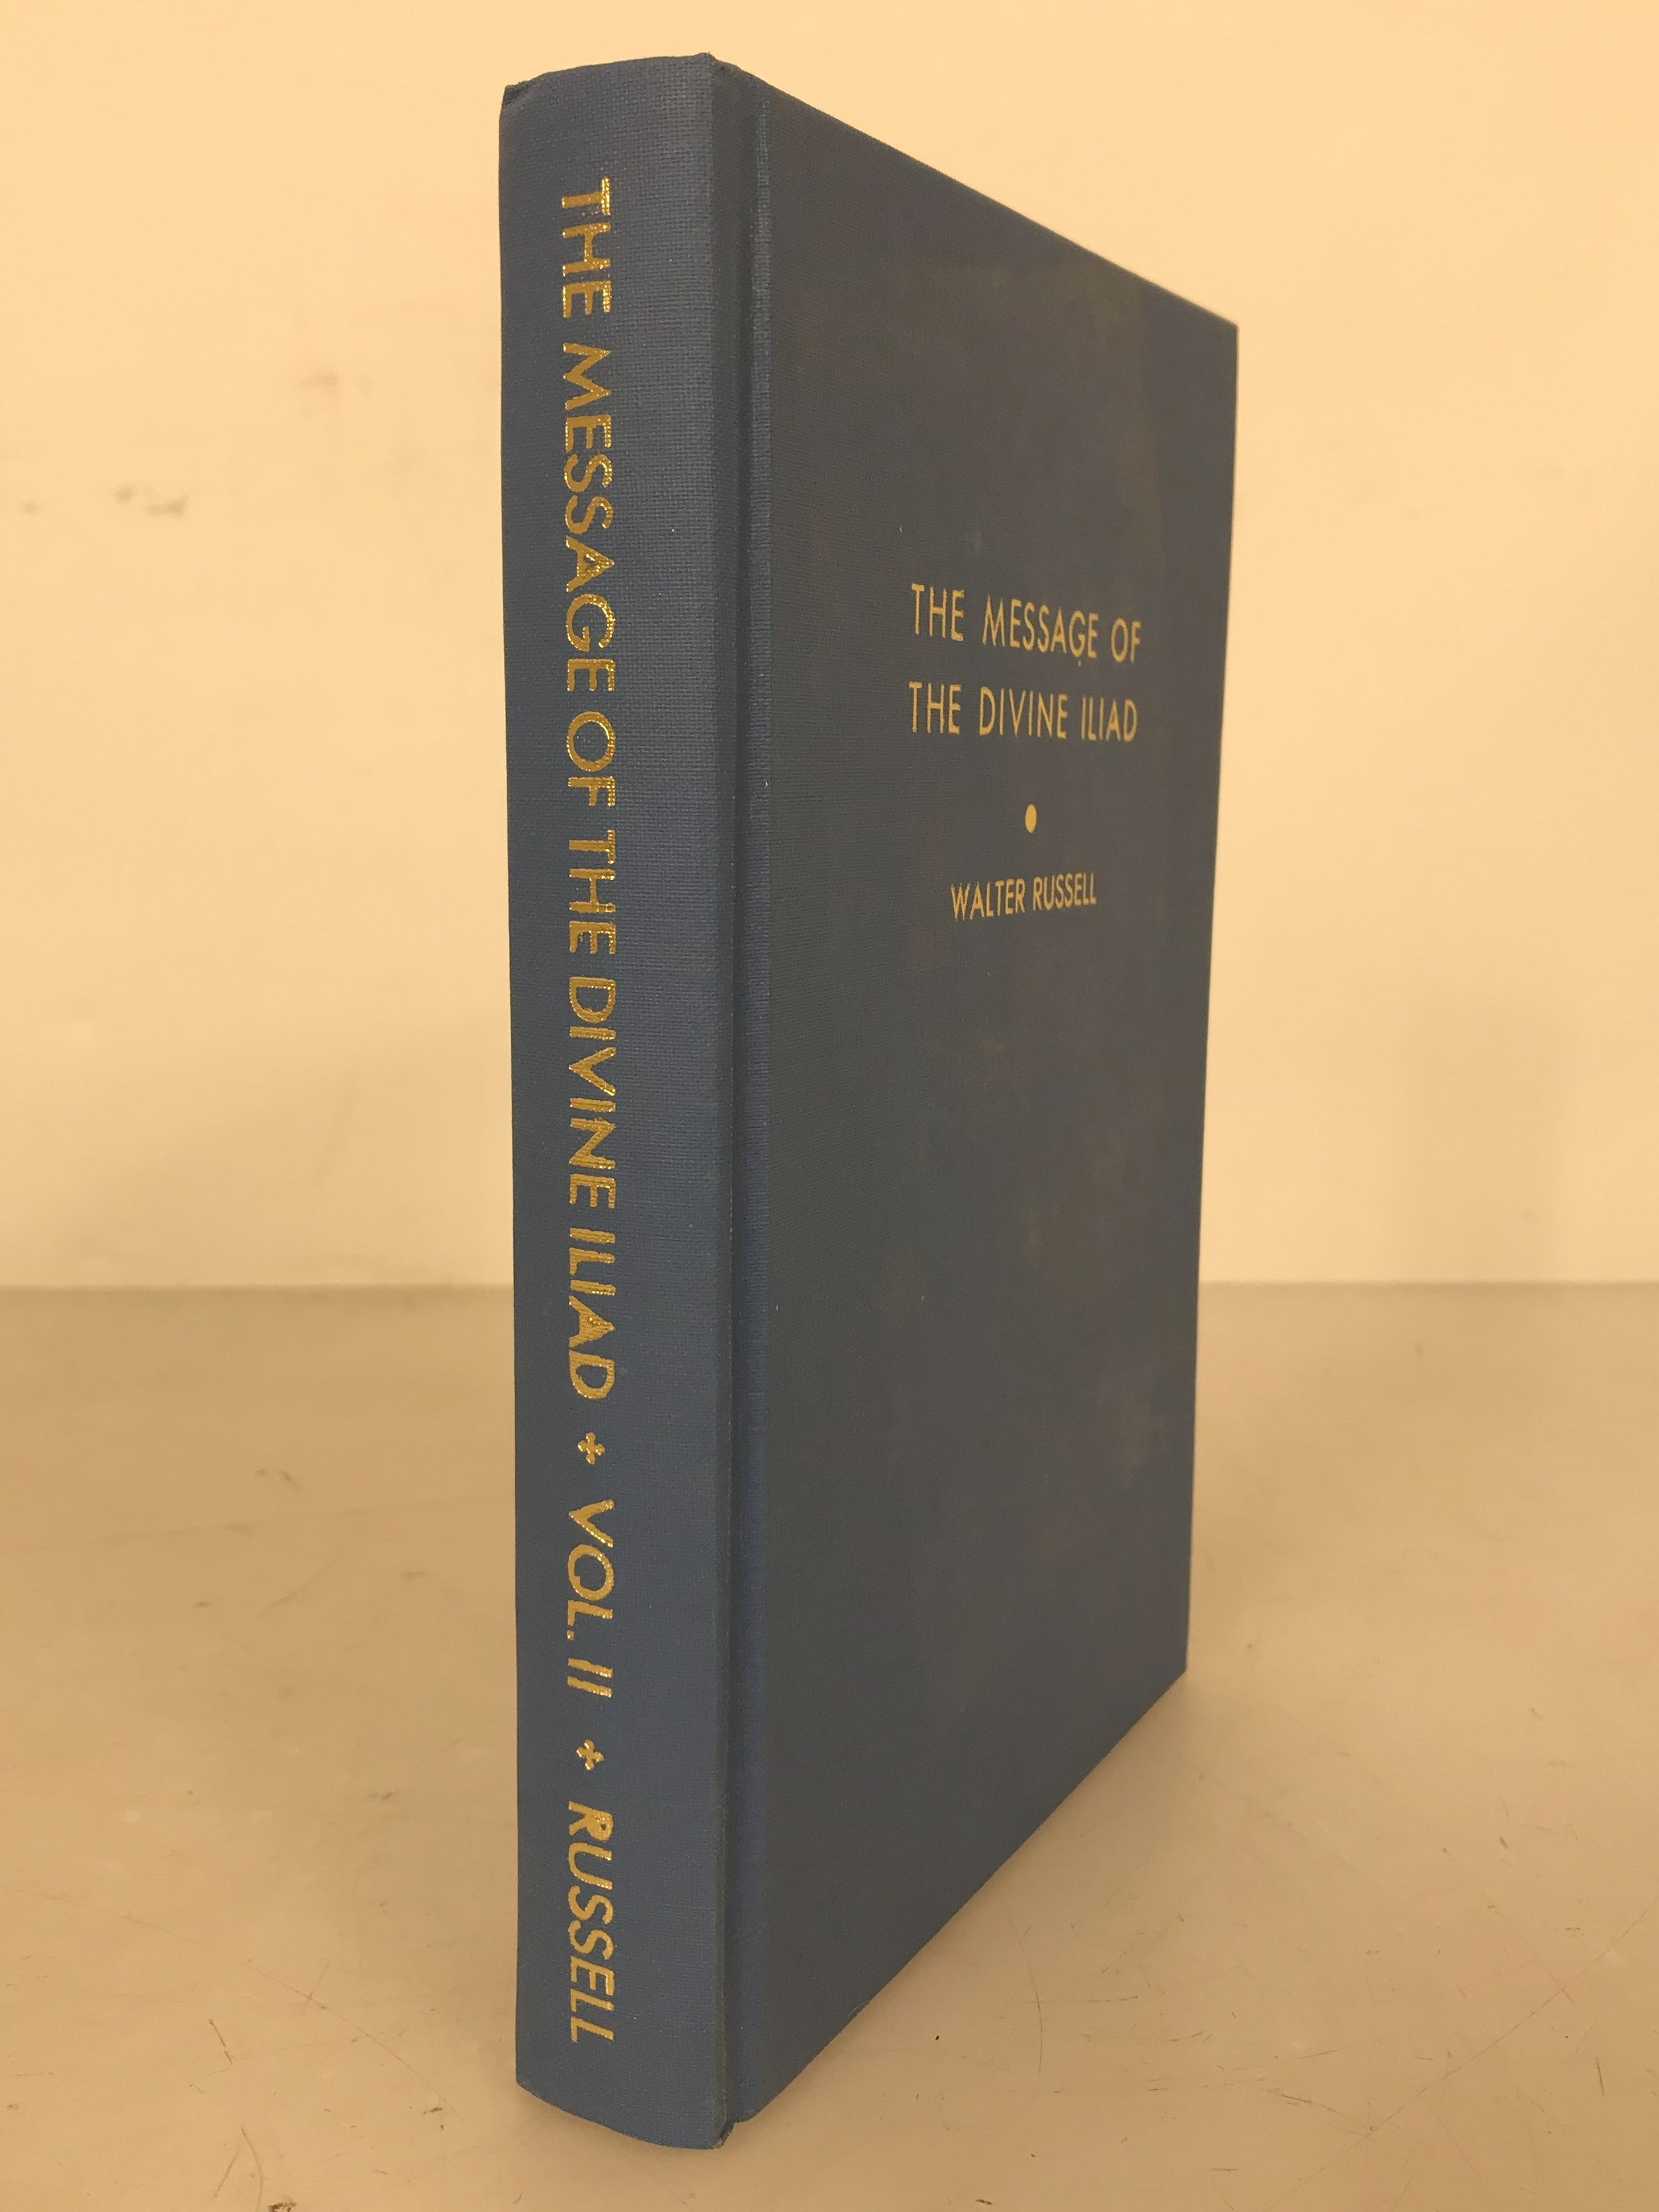 The Message of the Divine Iliad by Walter Russell Vol 2 1971 May Include Inscription